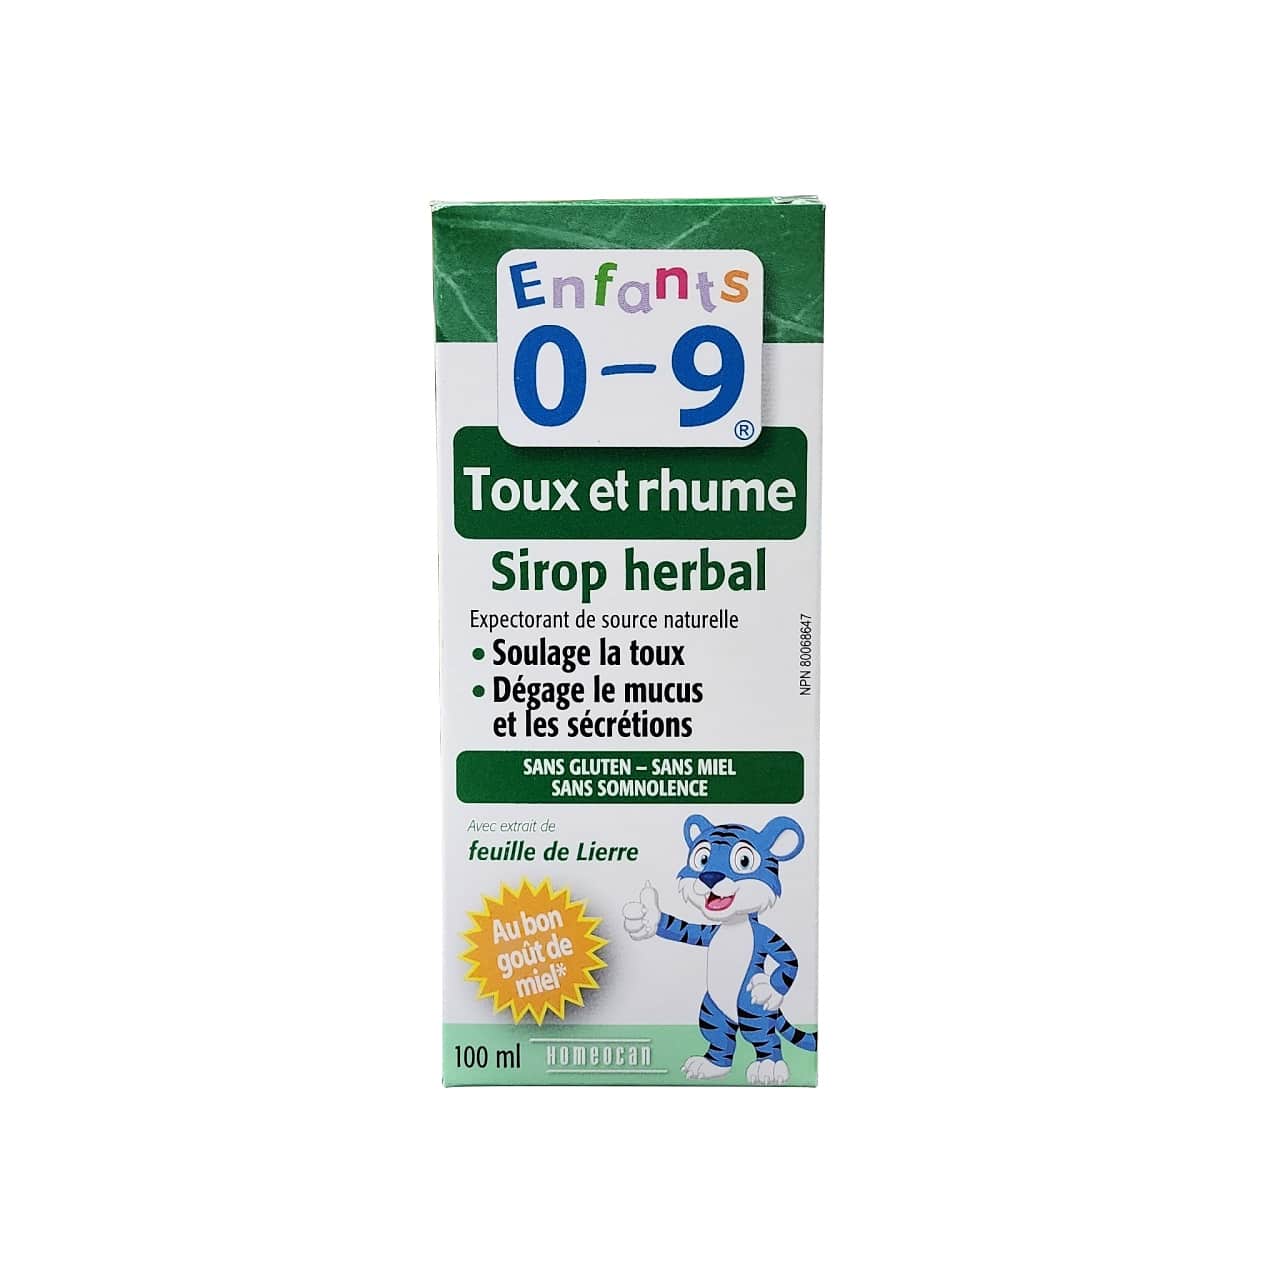 Product label for Homeocan Kids 0-9 Cough and Cold Herbal Syrup (100 mL) in French